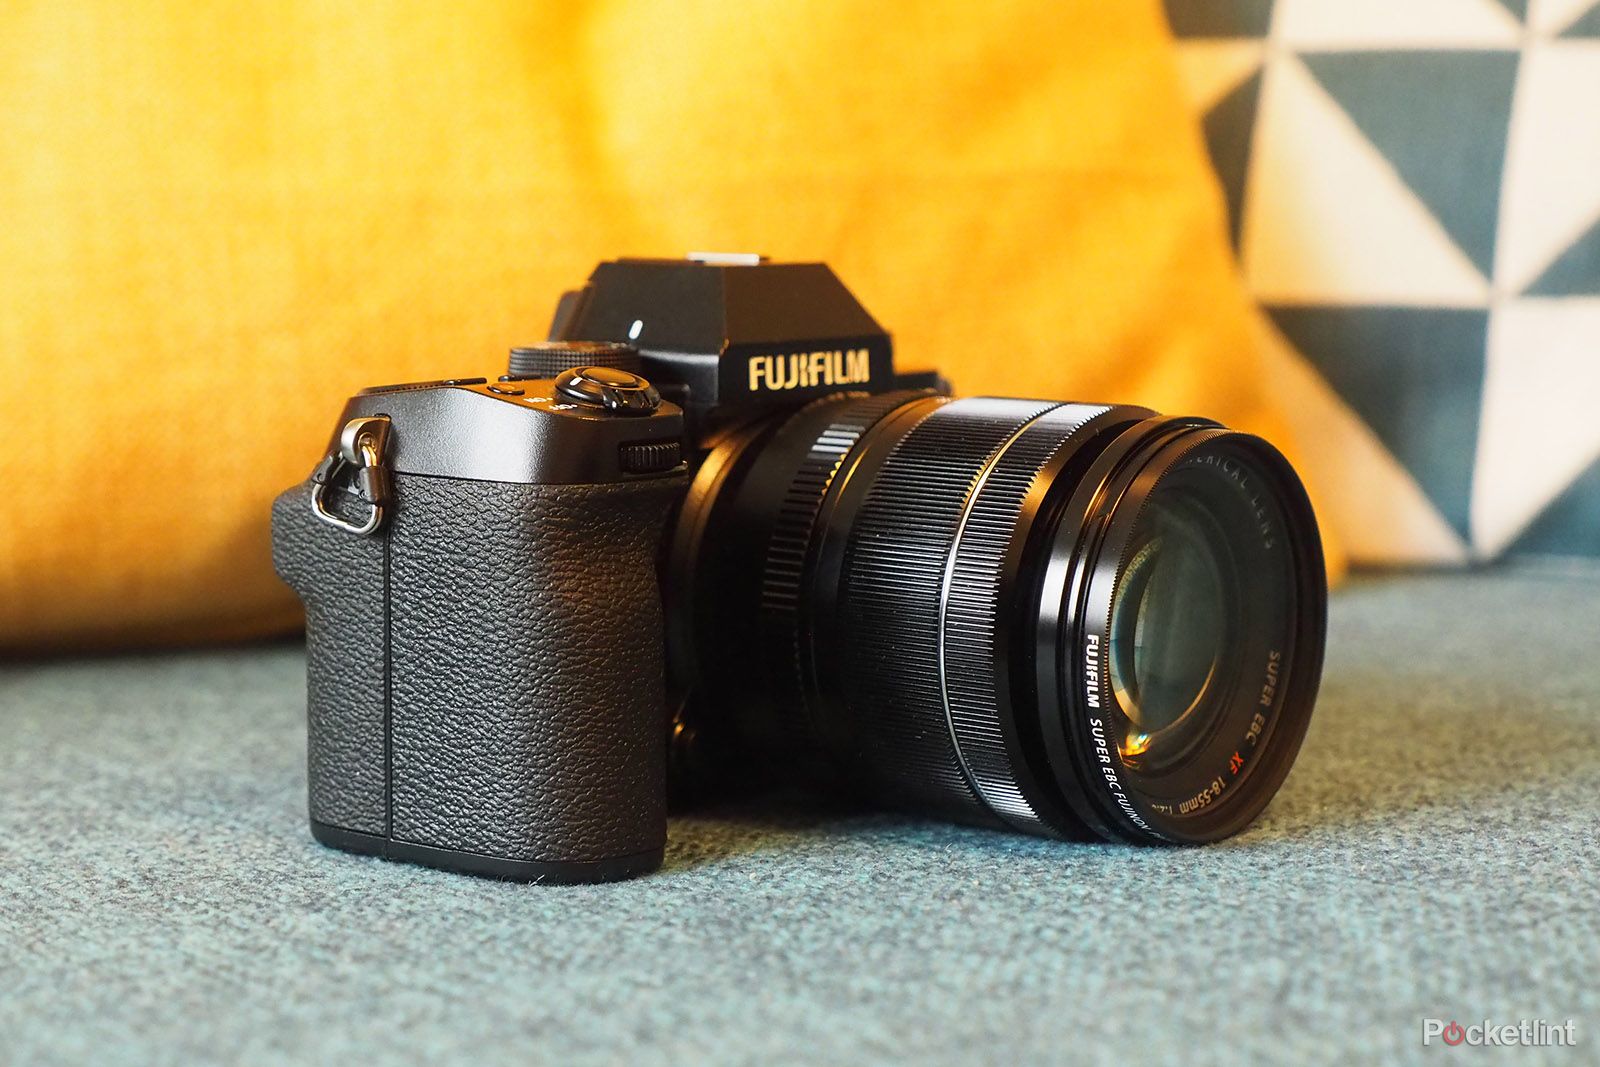 What to look for in a mirrorless camera? We highlight why the X-S10 is a great option photo 1